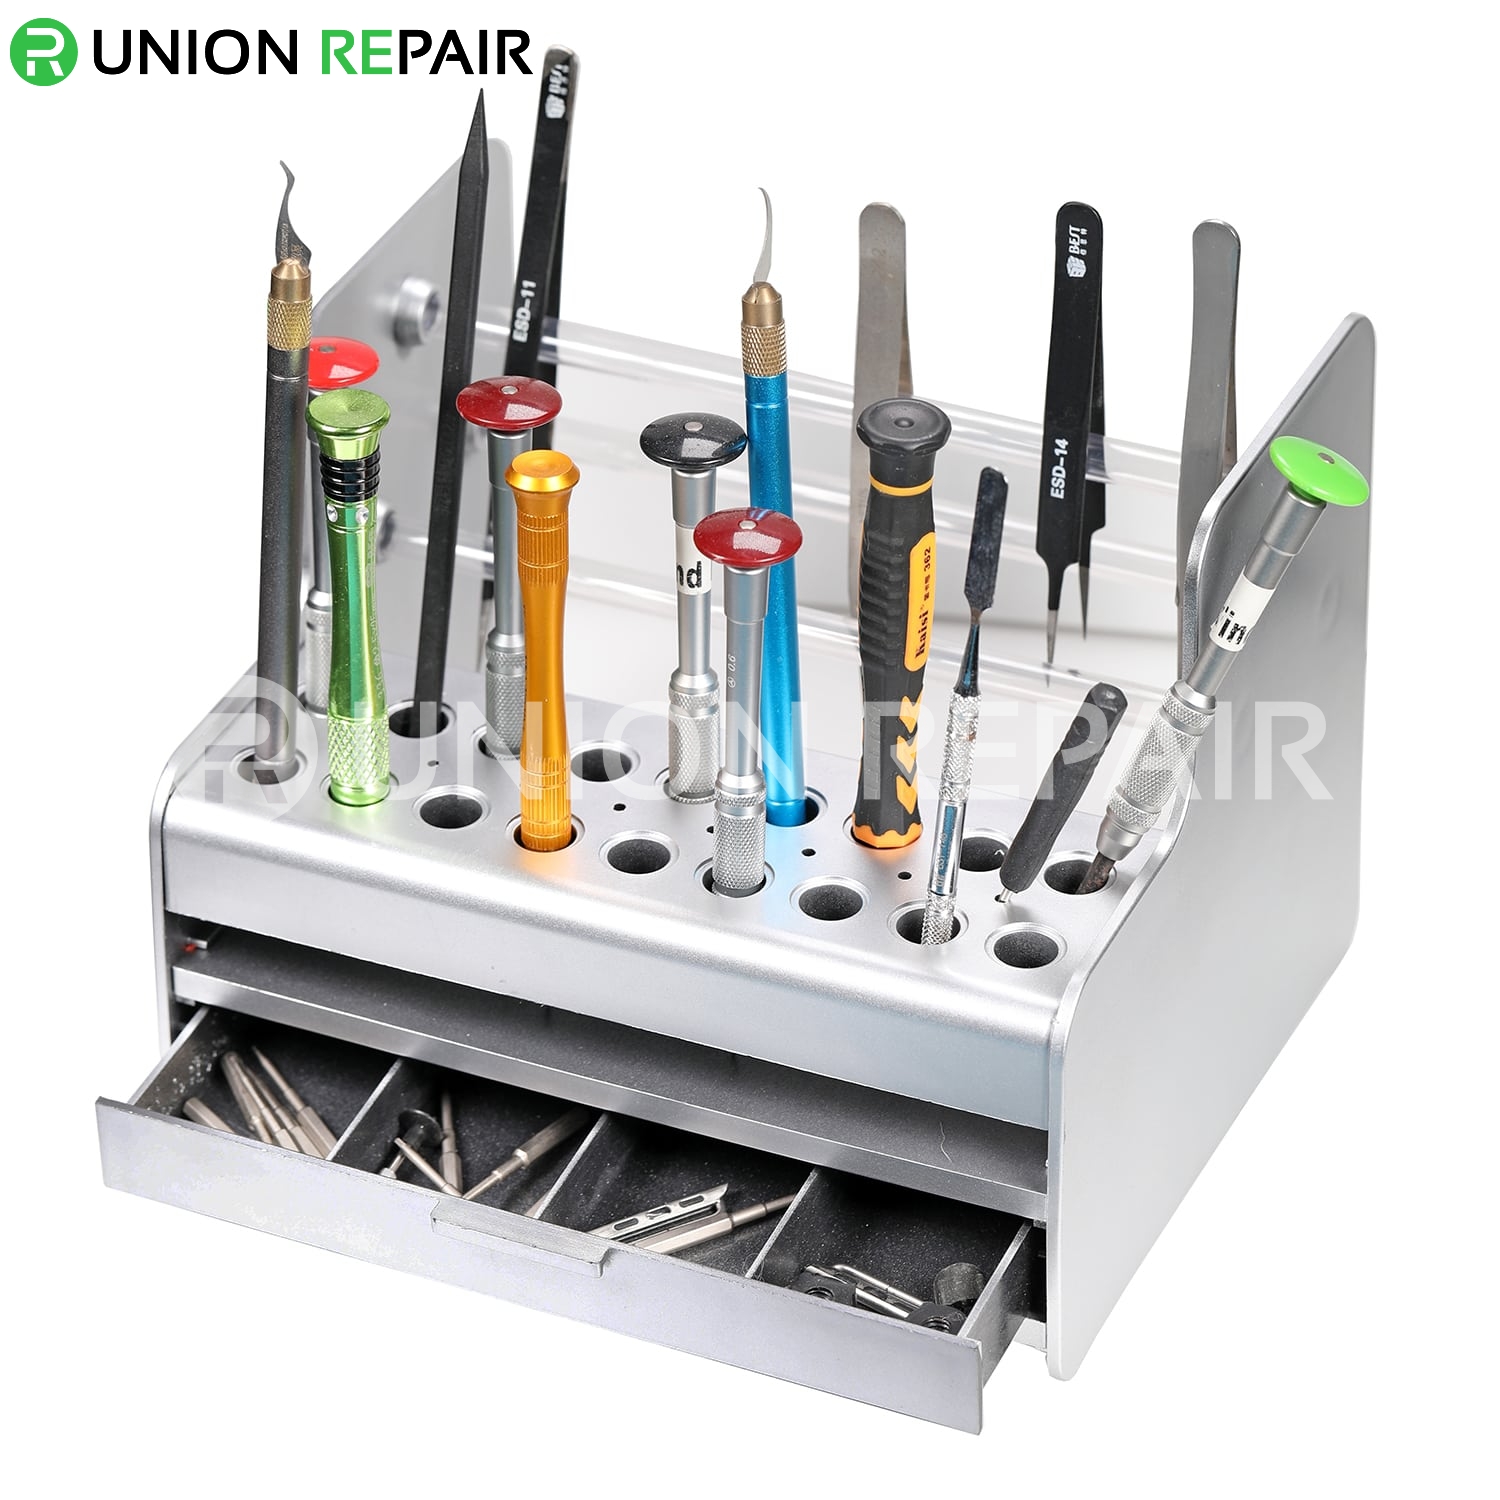 The PP Multi-Function Screwdriver Storage Box